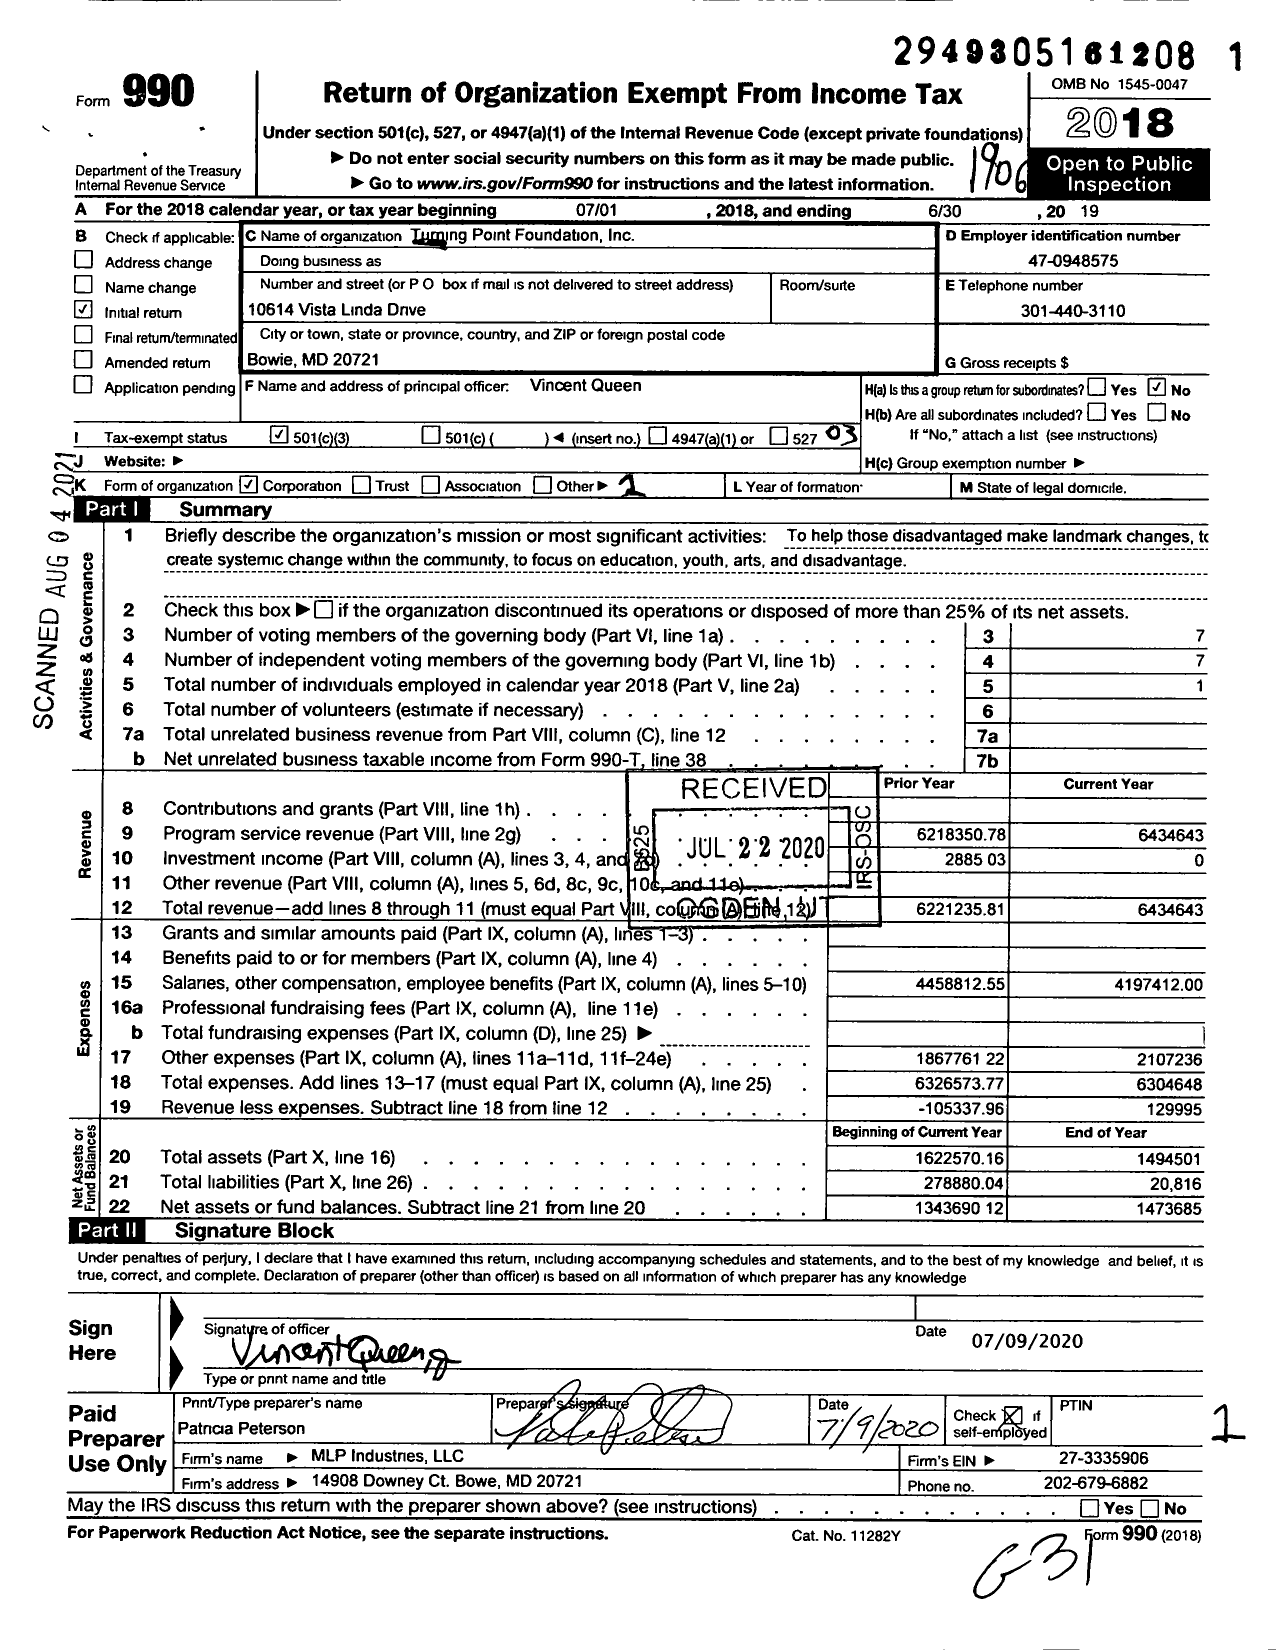 Image of first page of 2018 Form 990 for Turning Point Foundation